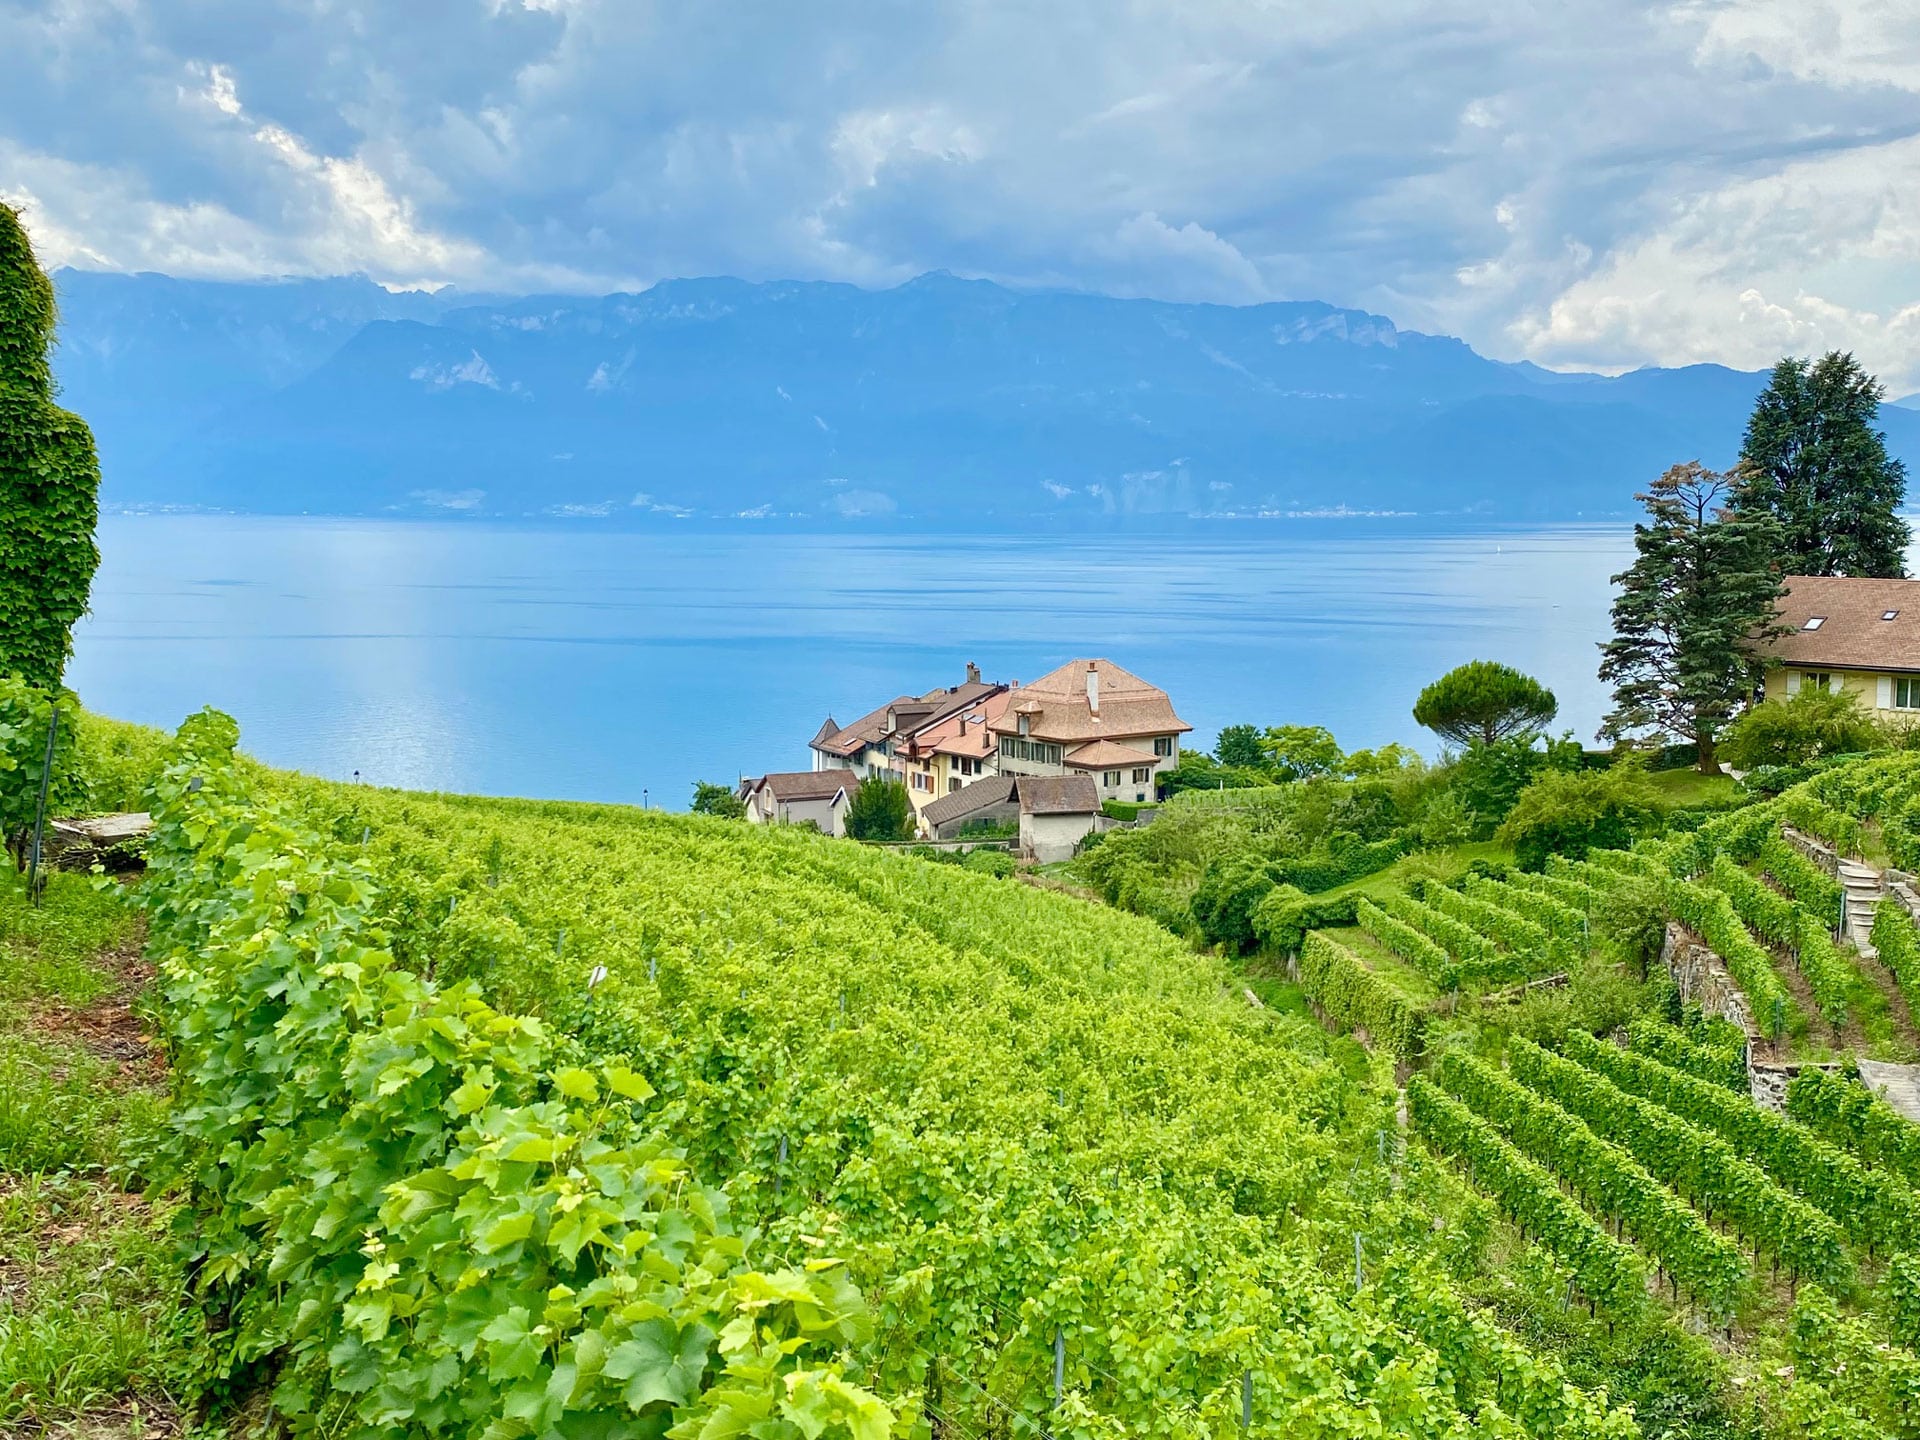 Western Switzerland 2 Days Private Tour – Between must-see places & hidden gems – Montreux, Vineyards & Grand Canyon of Switzerland (Basel)